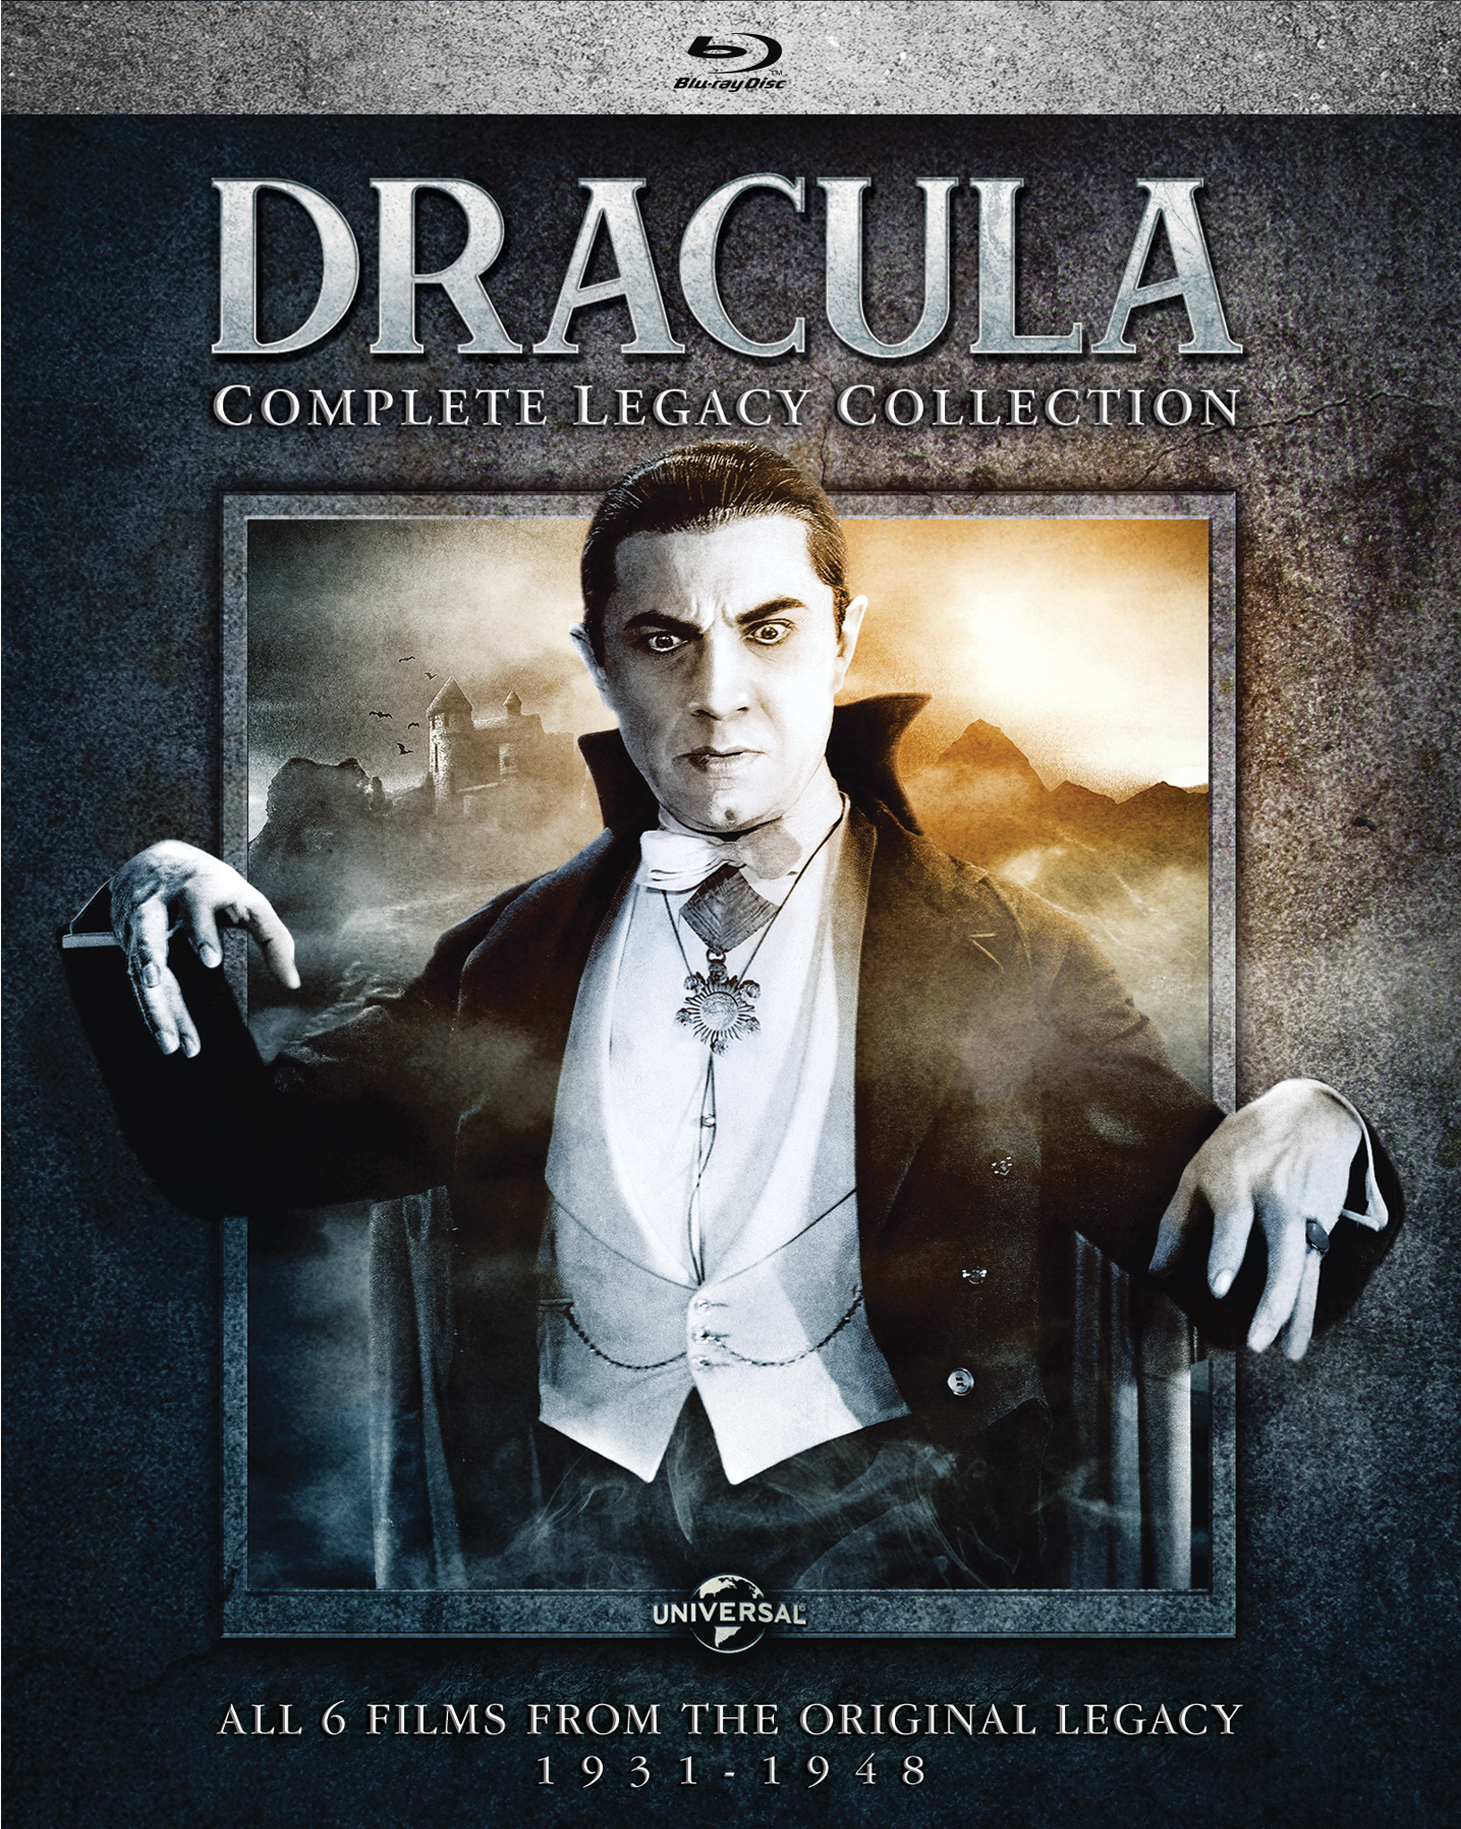 Dracula: Complete Legacy Collection - Blu-ray   - Horror Movies On Blu-ray - Movies On GRUV